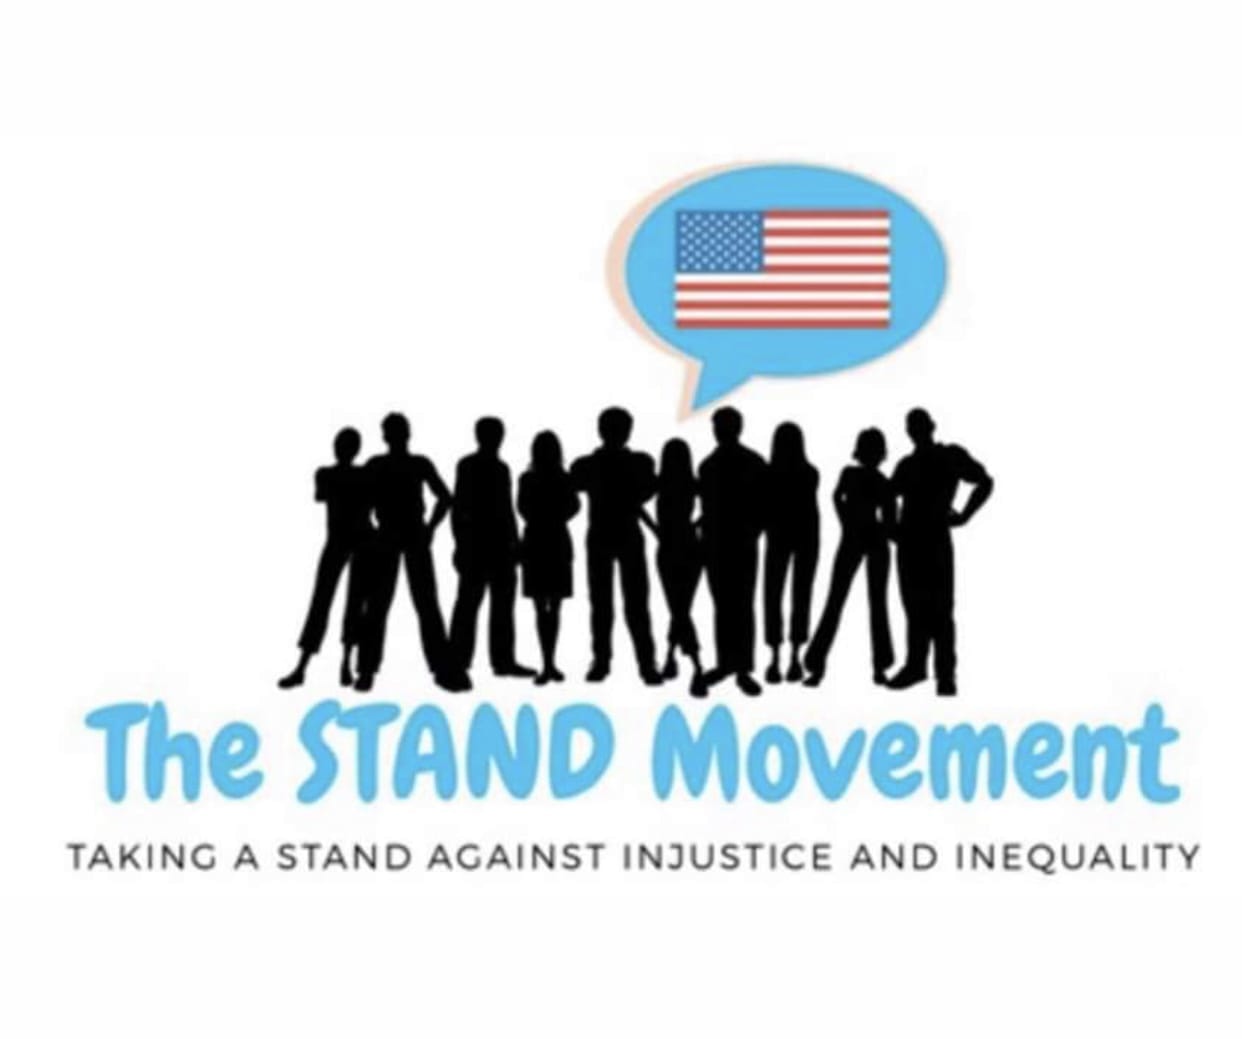 The Stand Movement